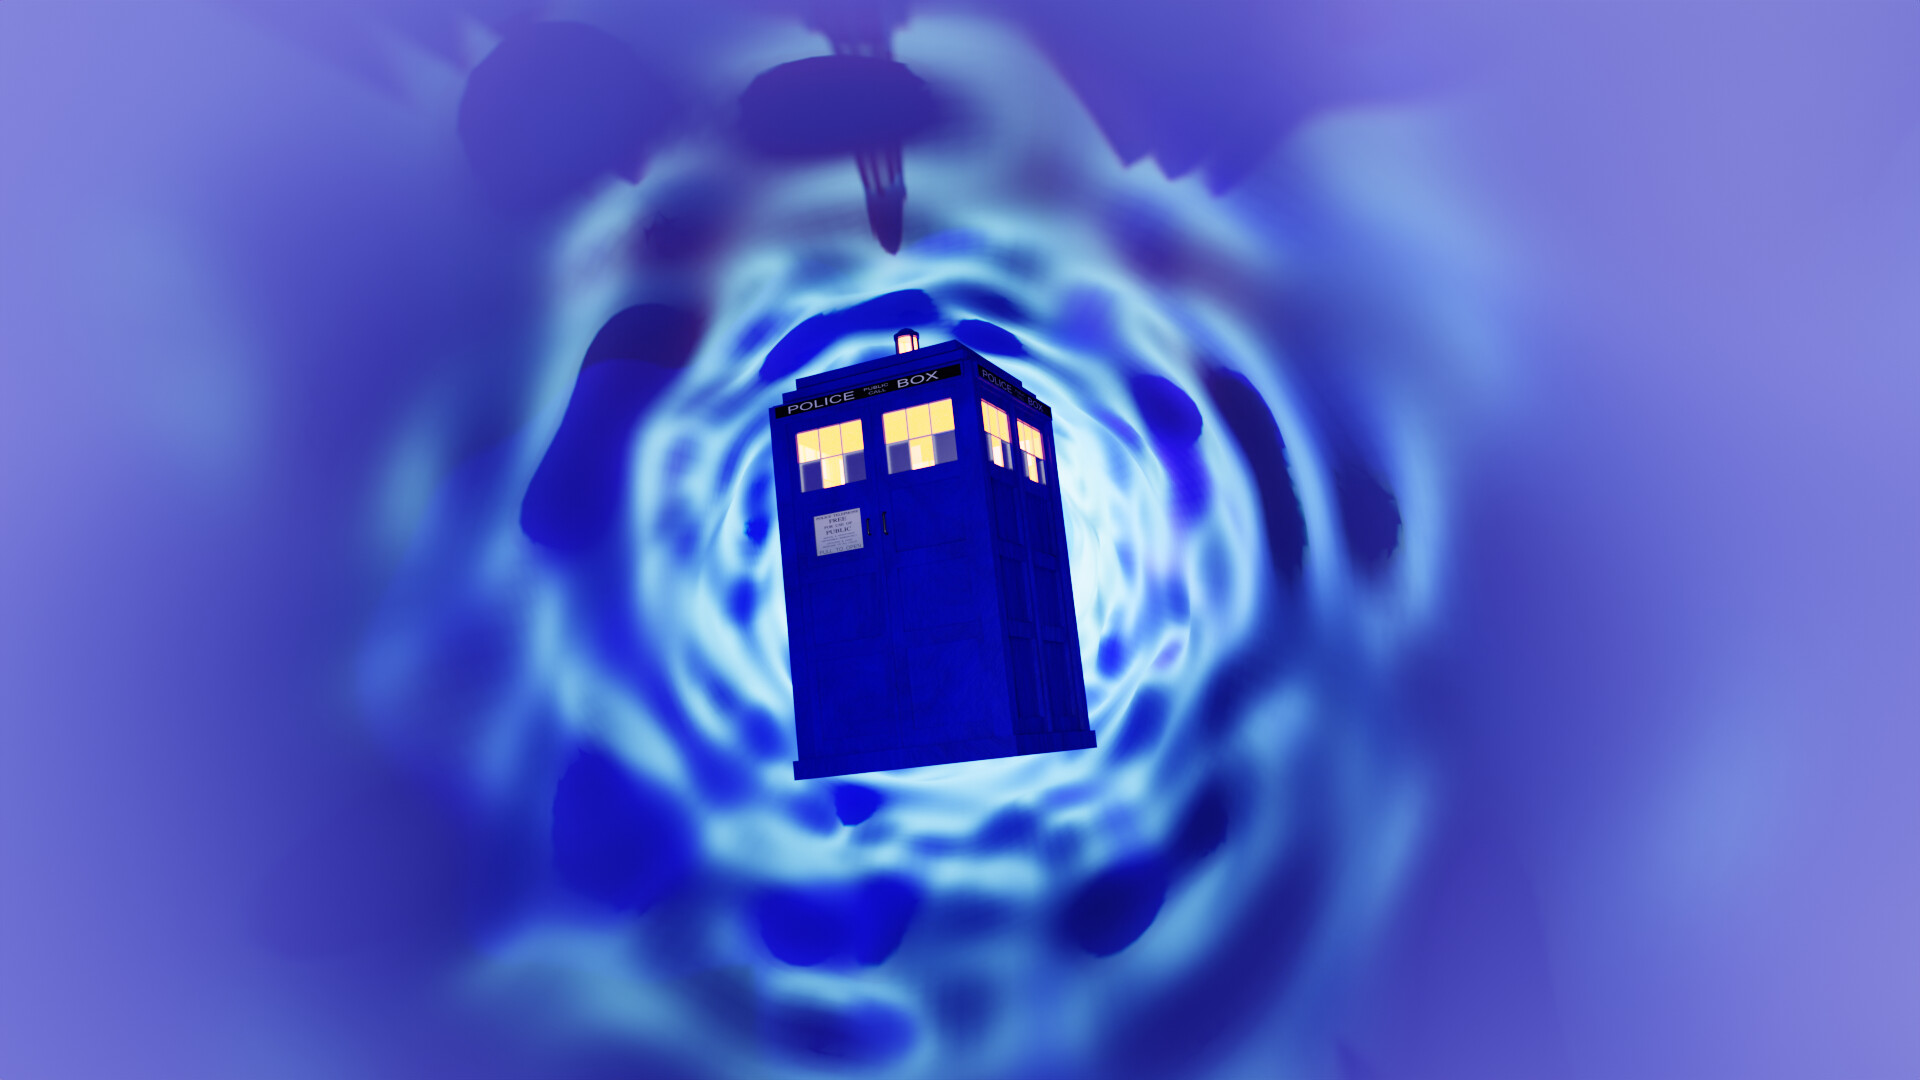 Doctor Who TARDIS - Doctor Who Into the Time Vortex